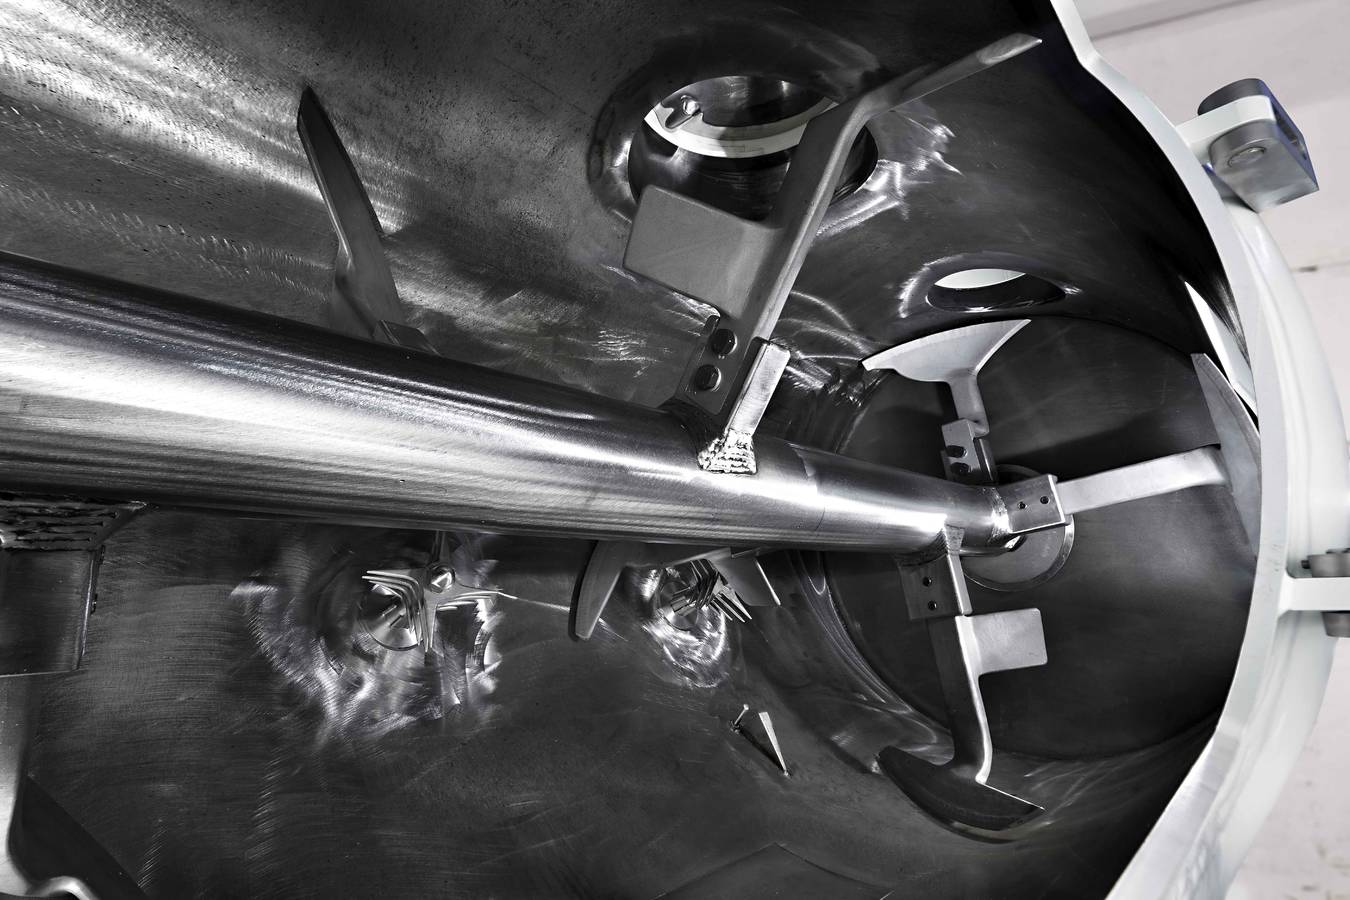 Lödige at EuroBrake 2020 Dry mixes of brake and friction materials in Ploughshare® Mixer